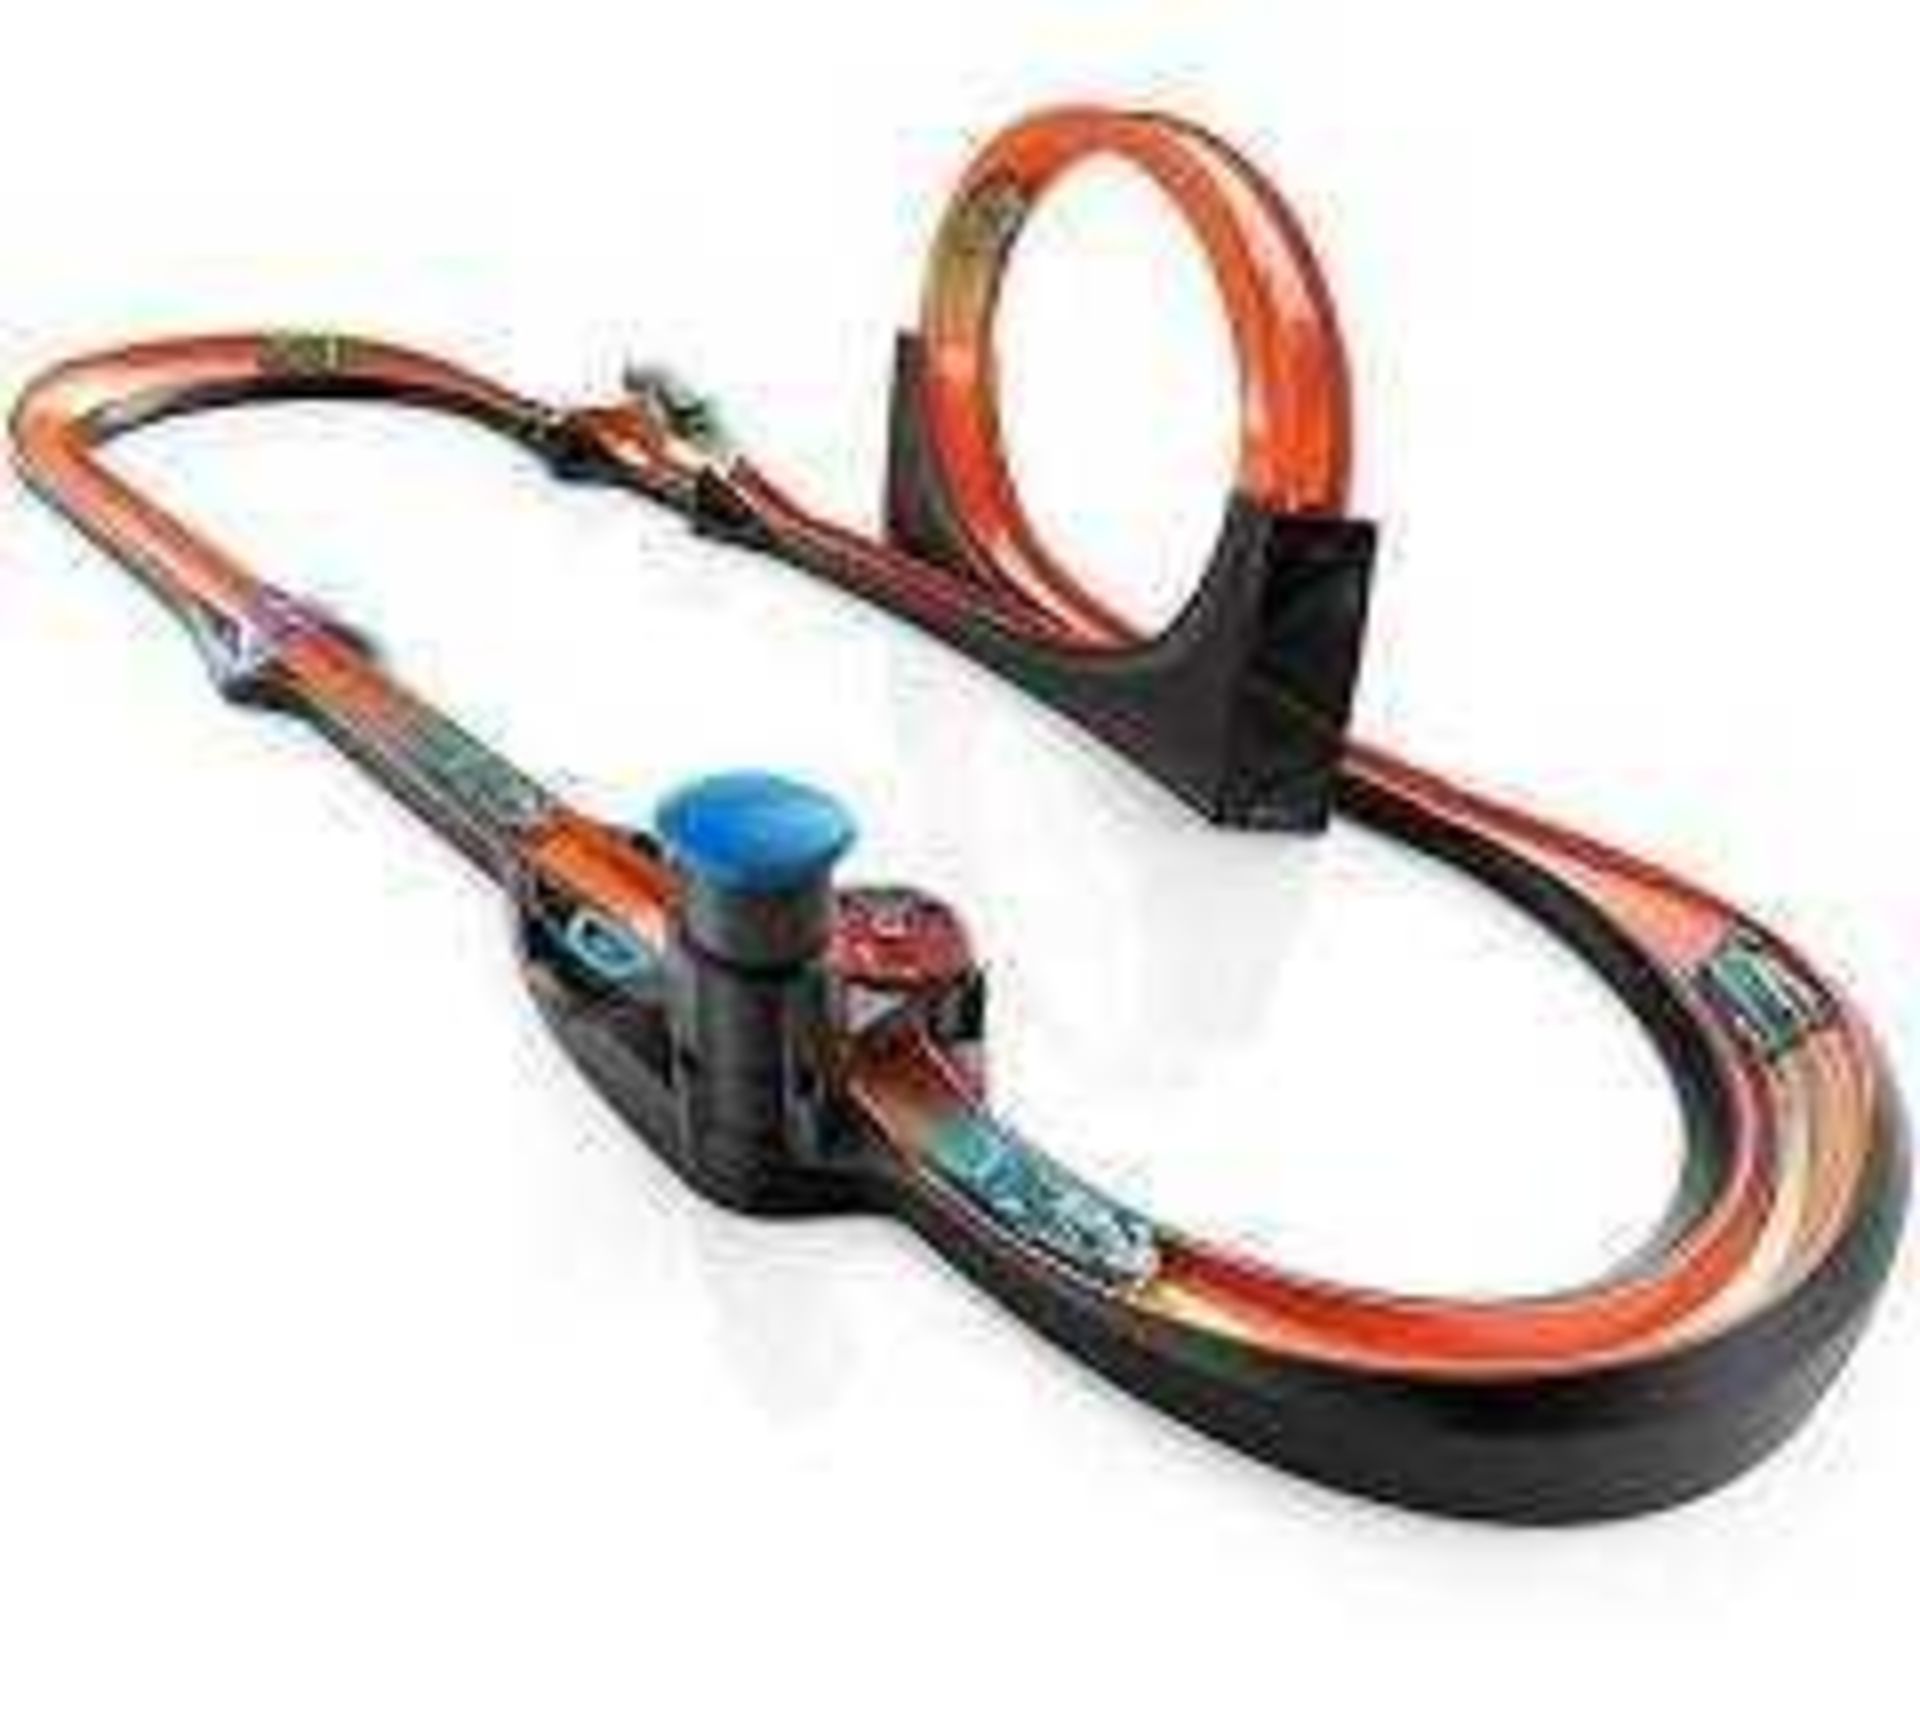 RRP £160 Boxed Hot Wheels Id Uniquely Identifiable Smart Track Kit (Appraisals Available On Request)